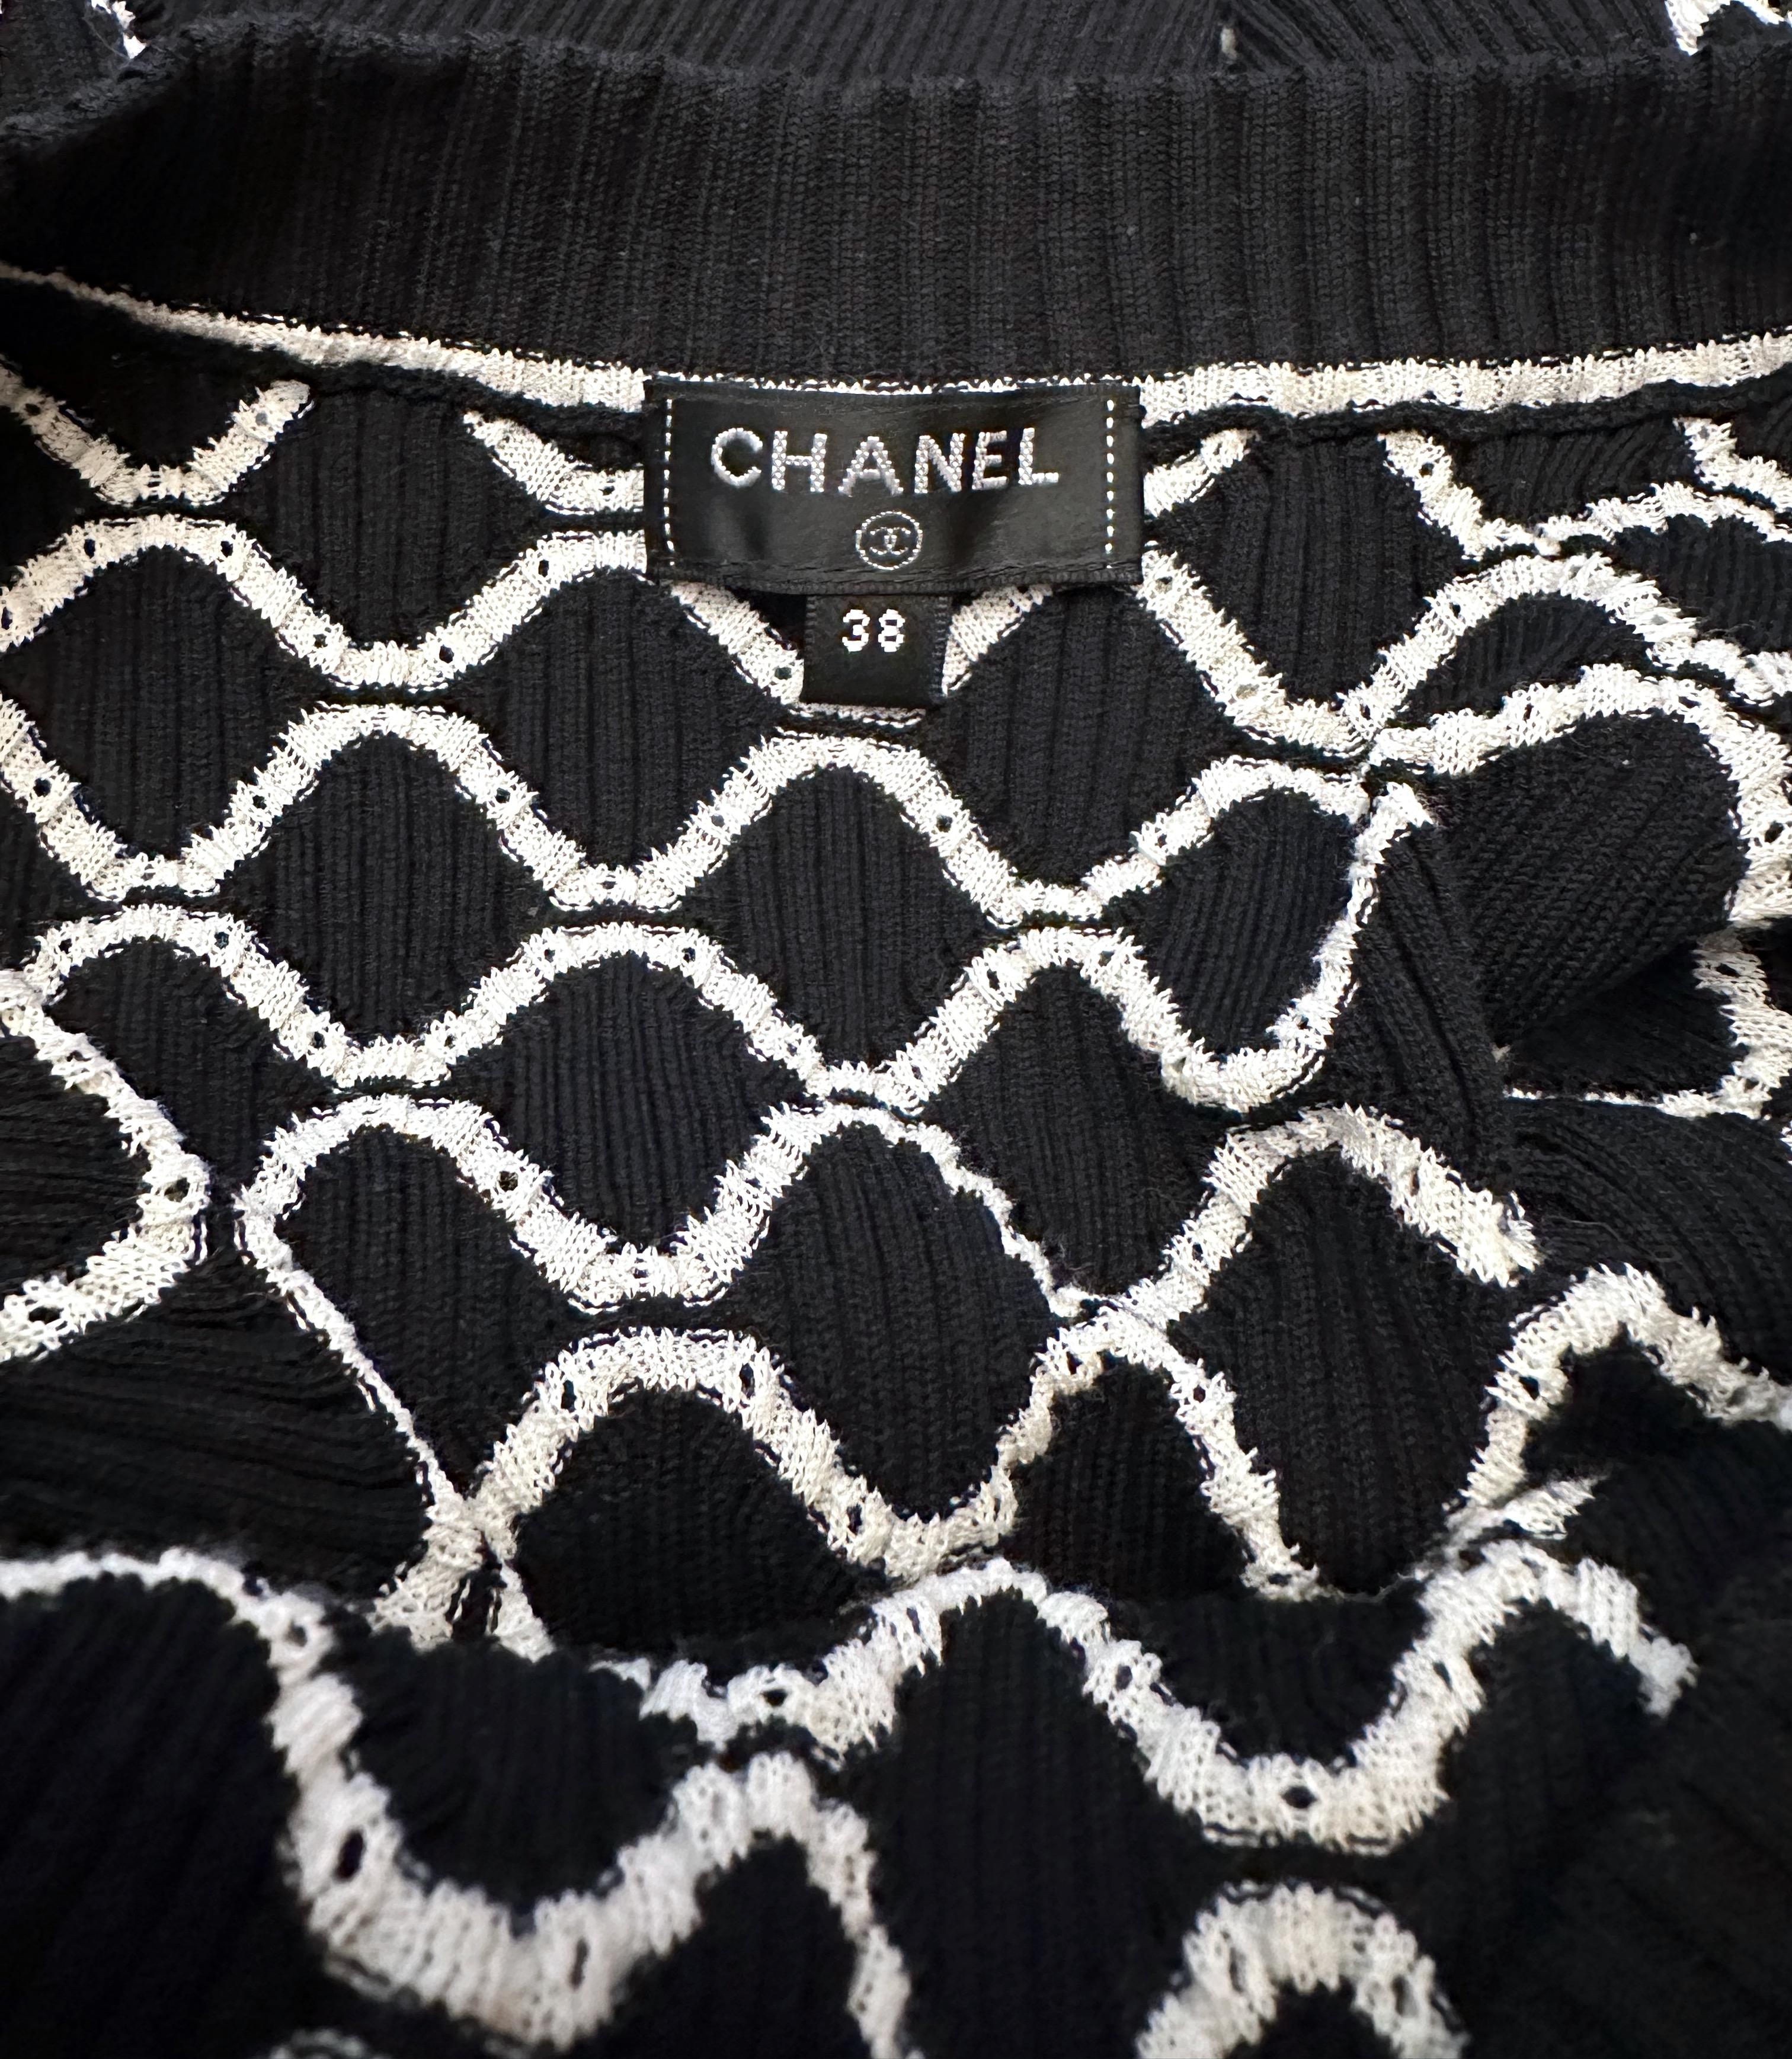 Chanel Black and White Cotton Knit Top 1